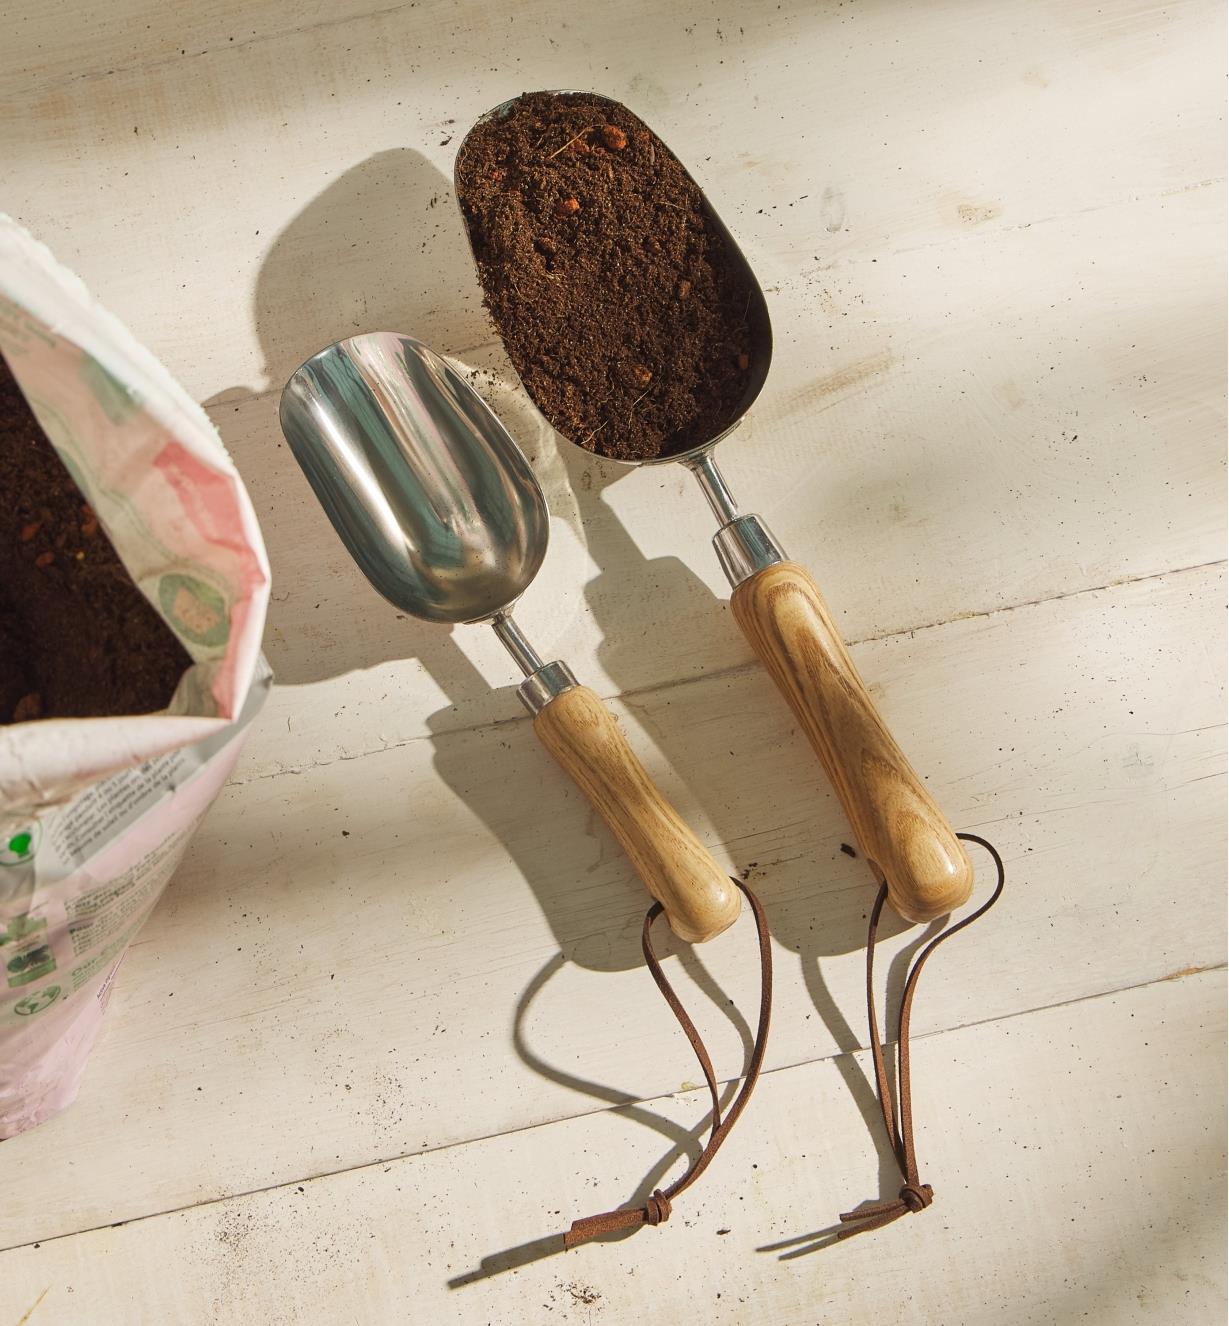 A 1 cup stainless-steel scoop filled with soil sits next to an empty ½ cup scoop on a wood surface